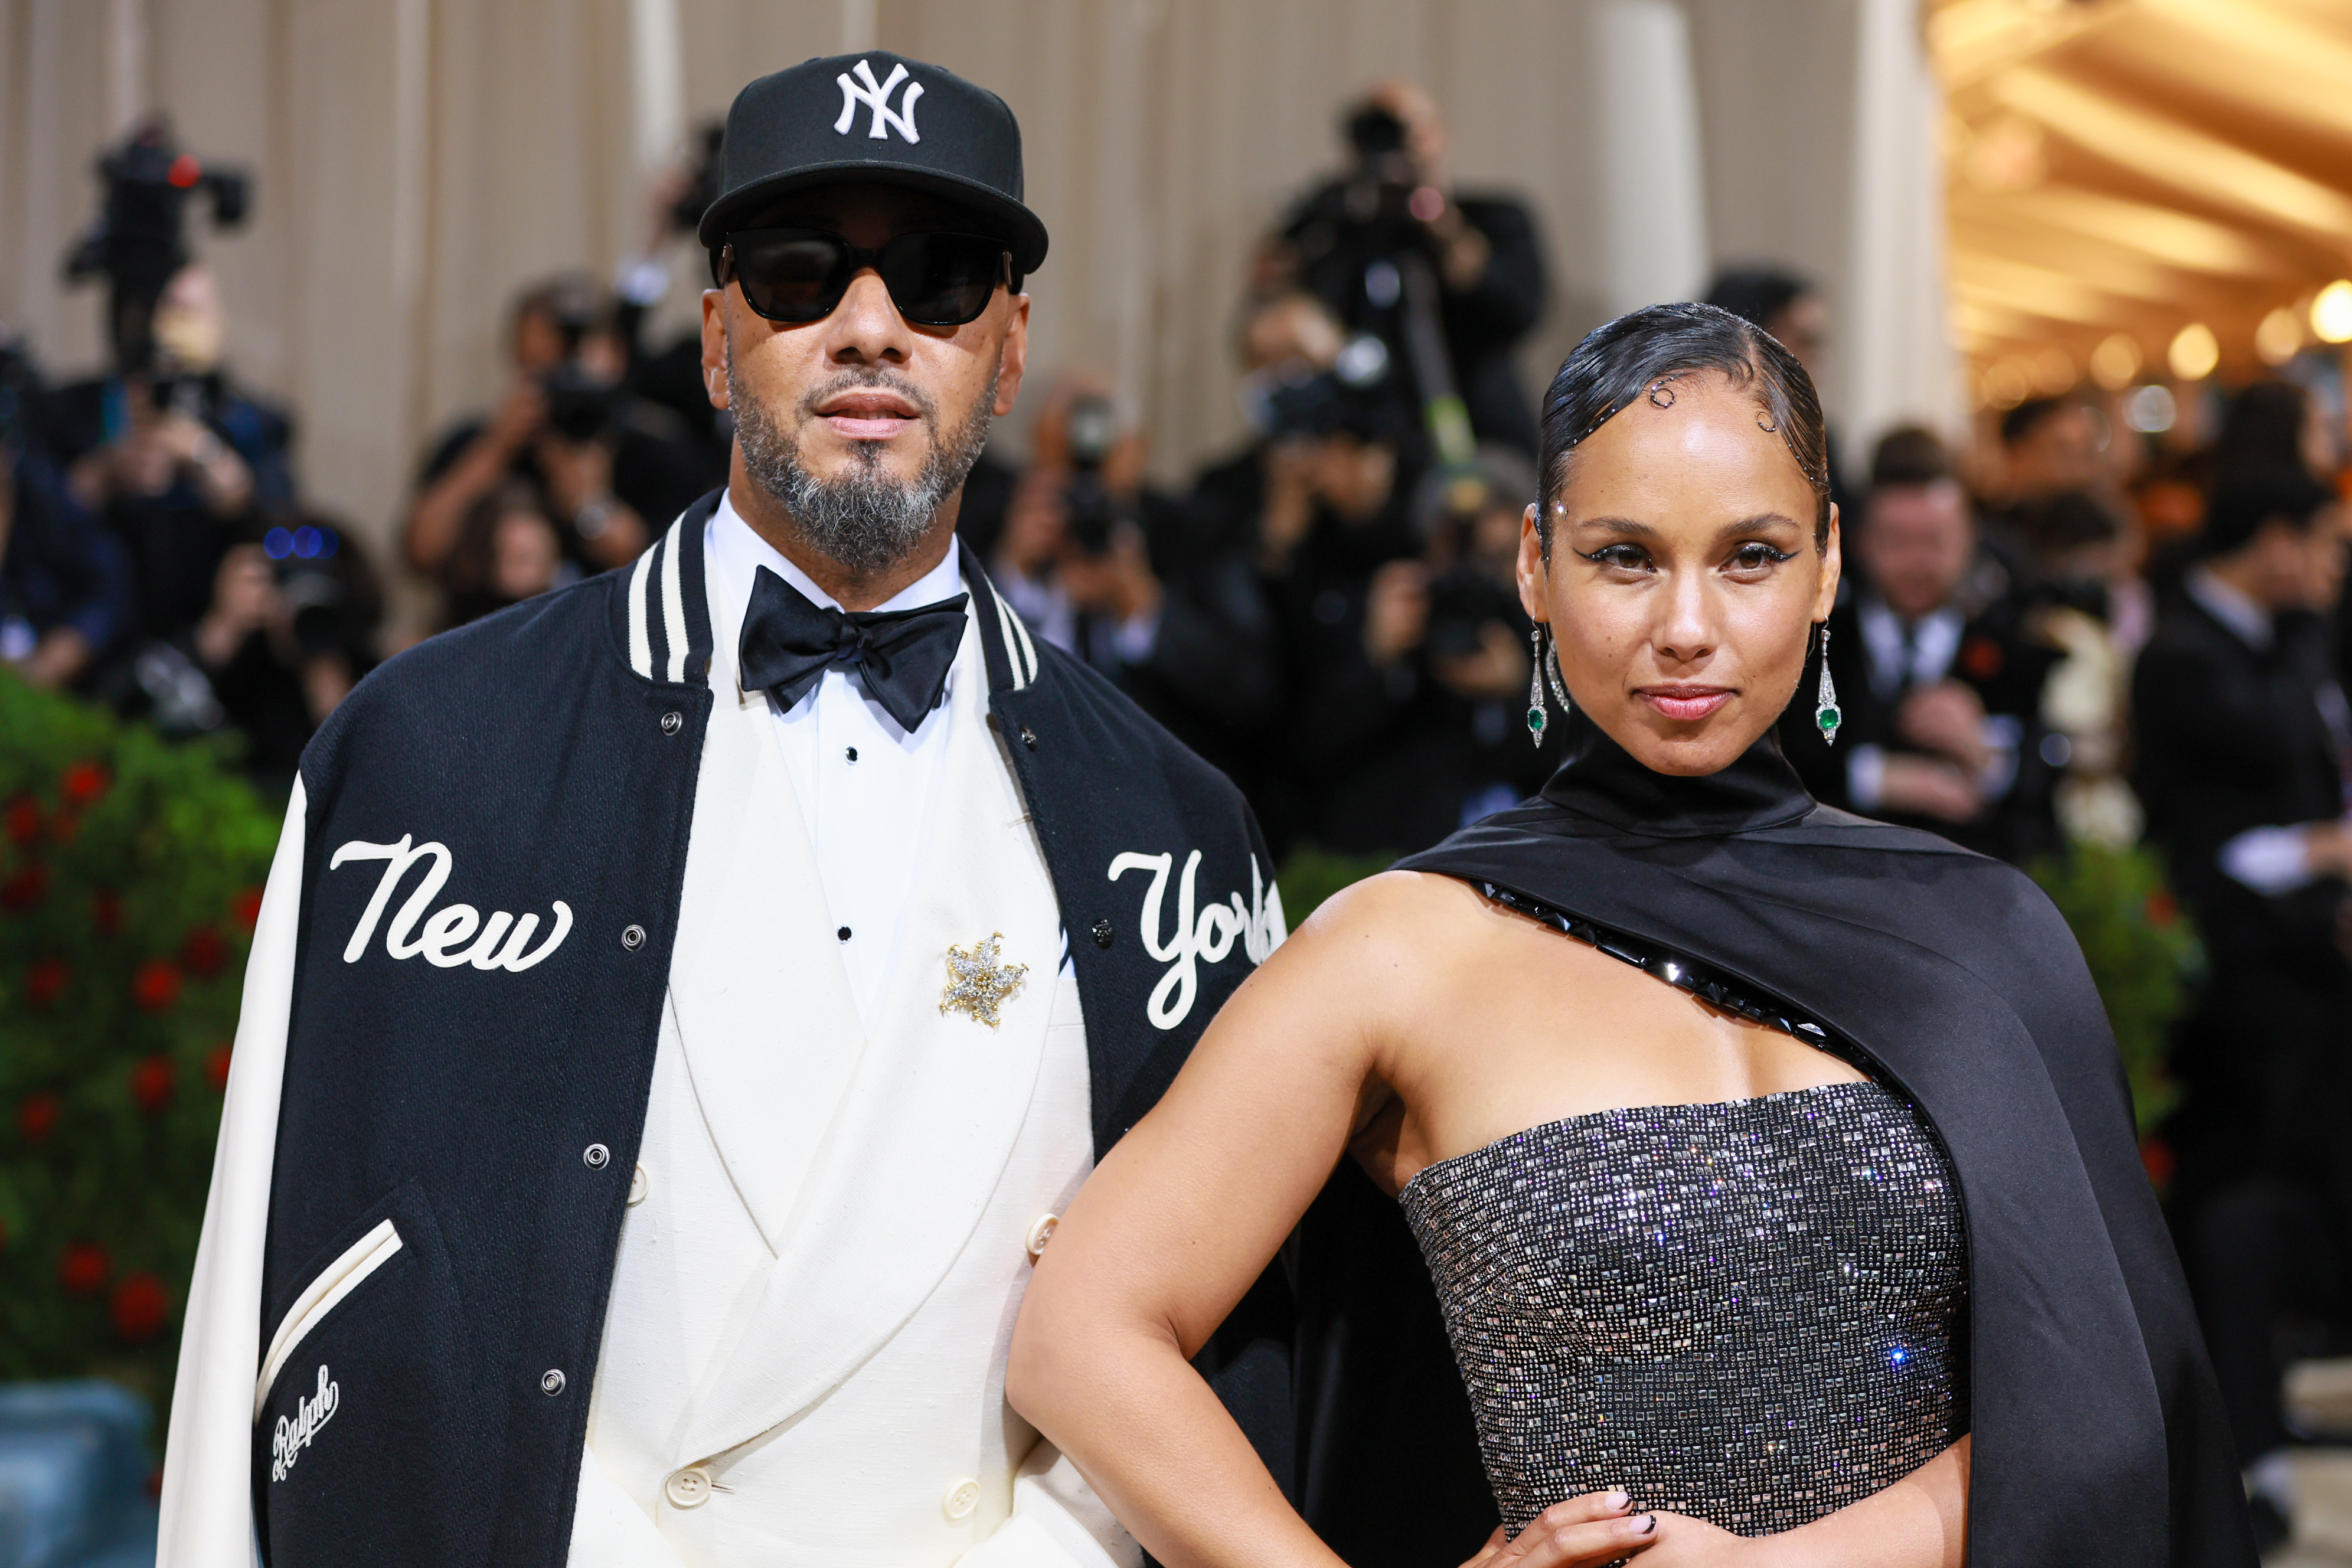 Swizz Beatz in a suit with New York Yankees cap and Alicia in a sparkly dress with a shawl, at an event